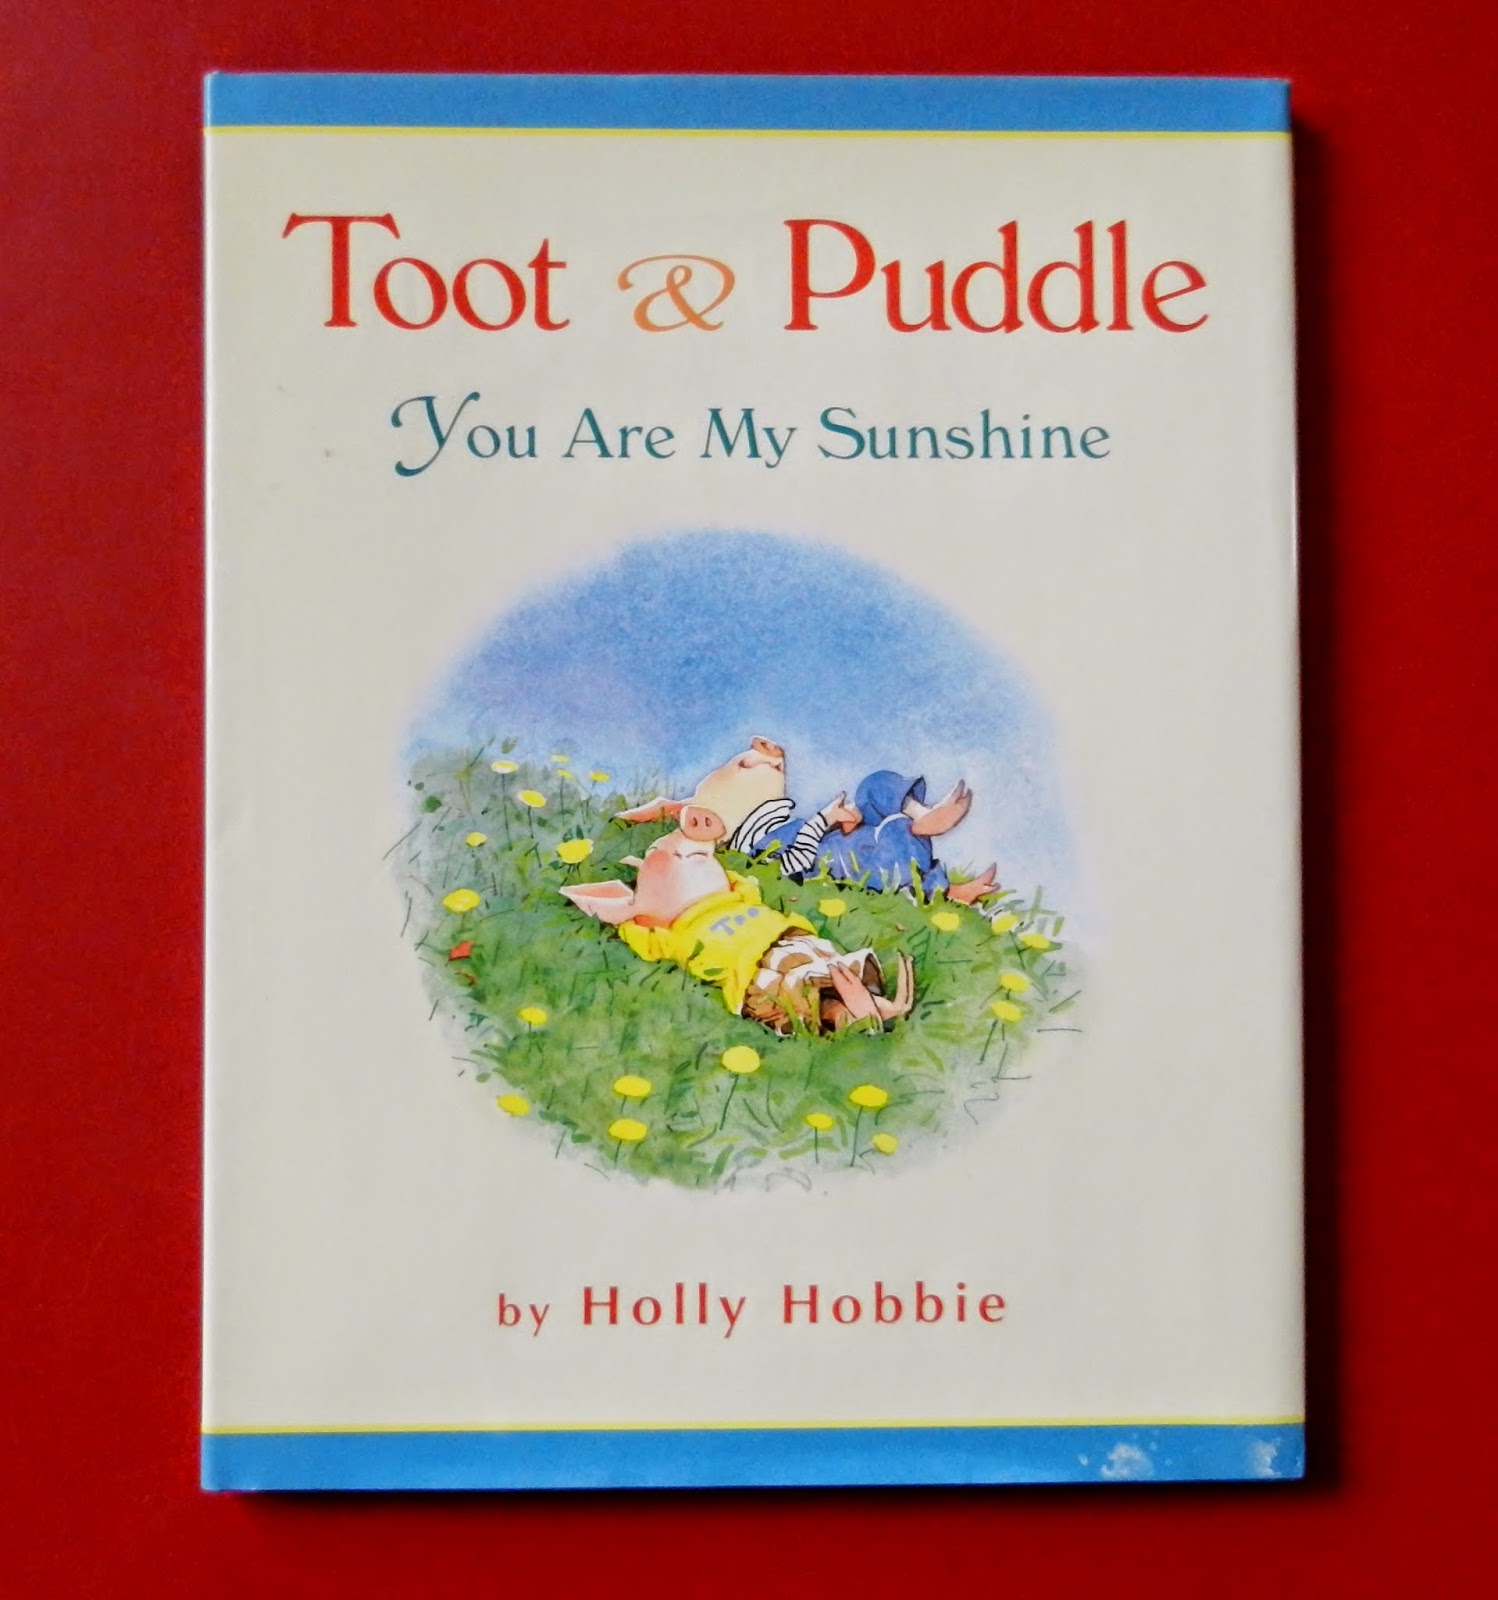 Picture Book Theology: A Picture Book a Day for a Year: Day 333